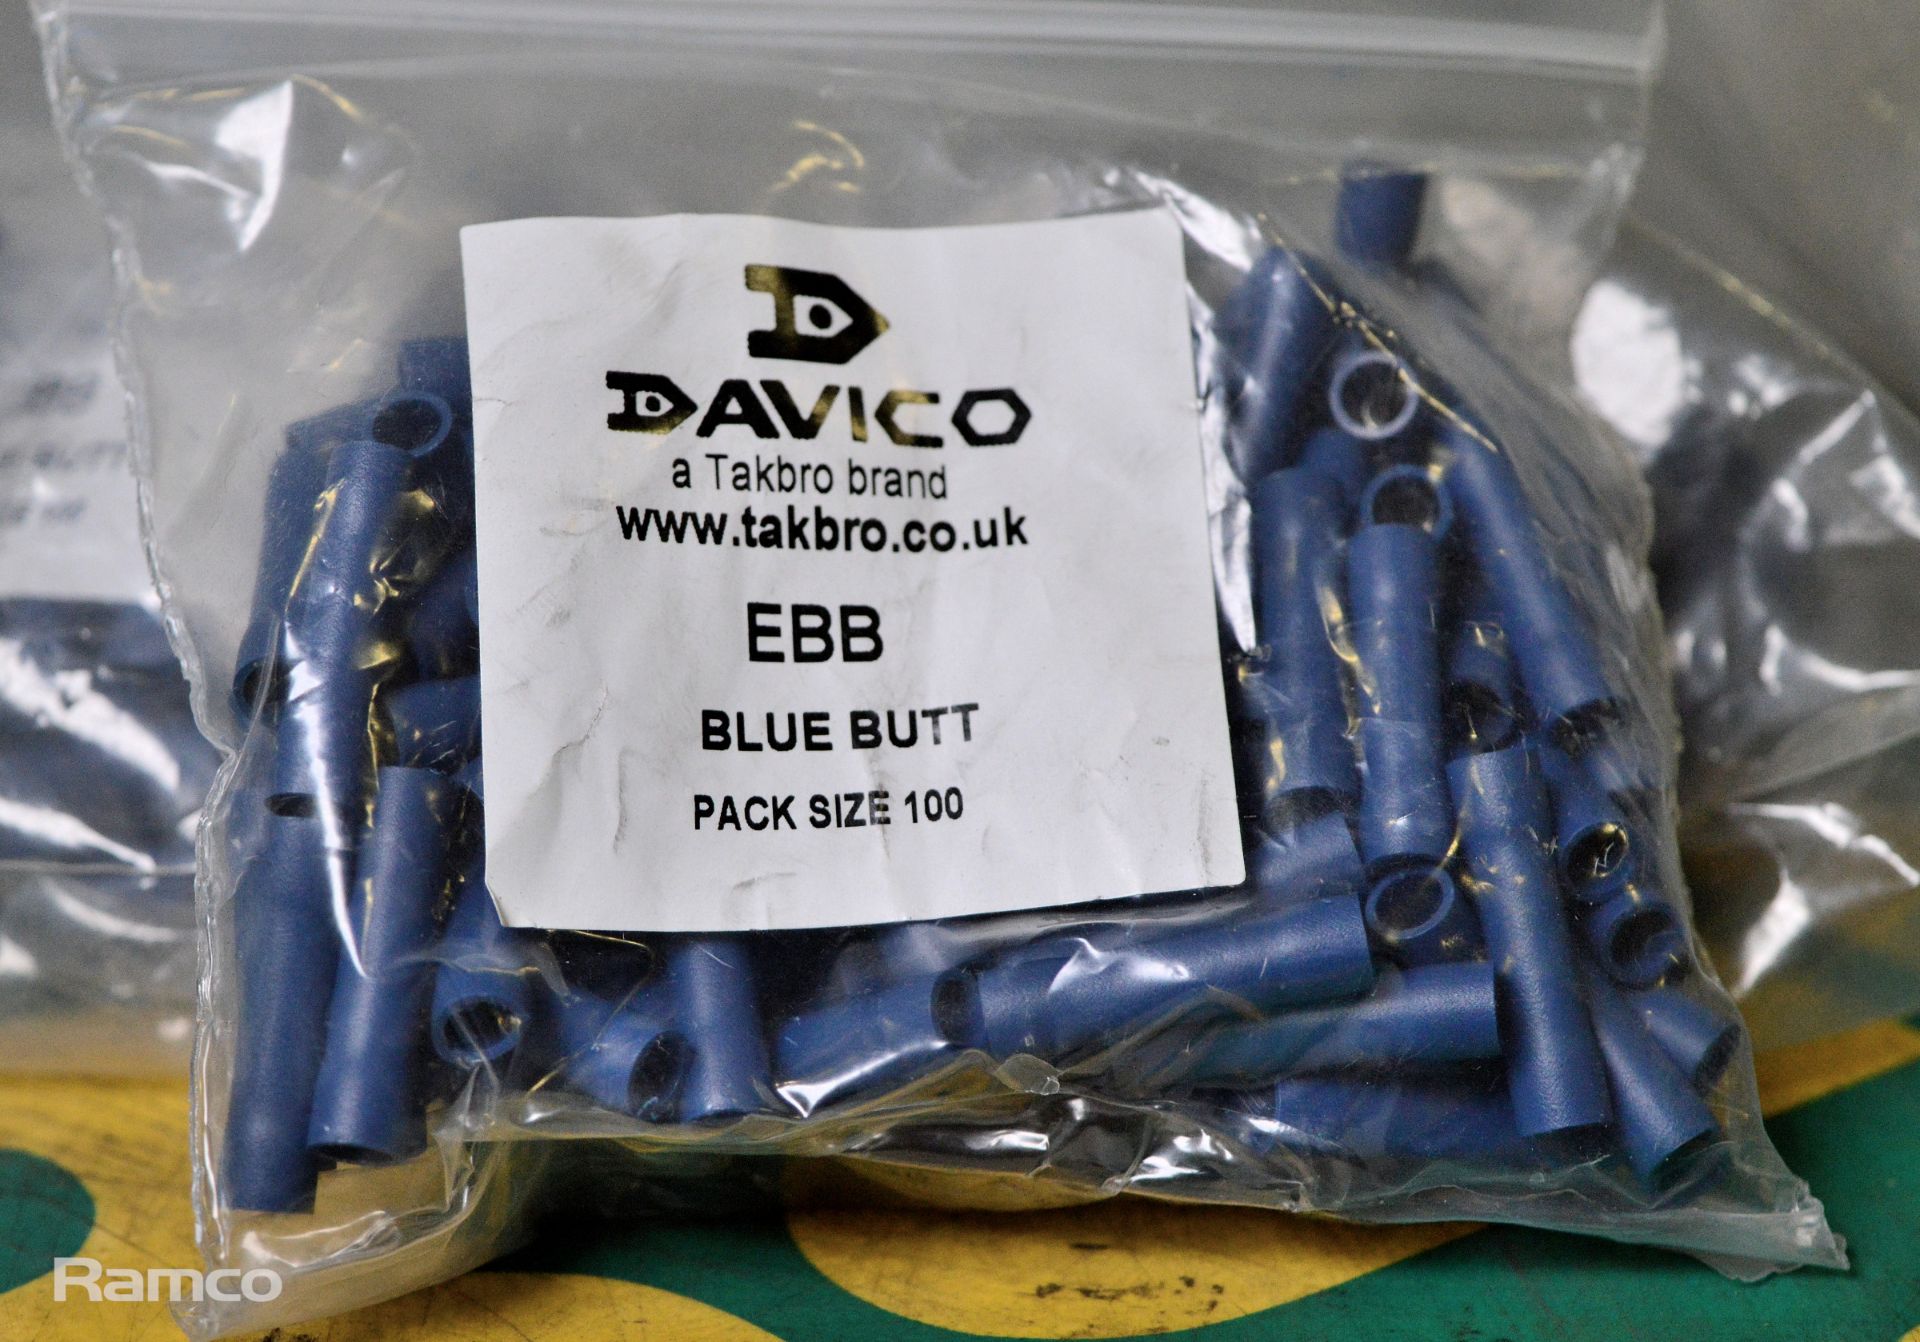 Blue butts, Griffon PVC cleaner, sticker pads, connectors - Image 3 of 6